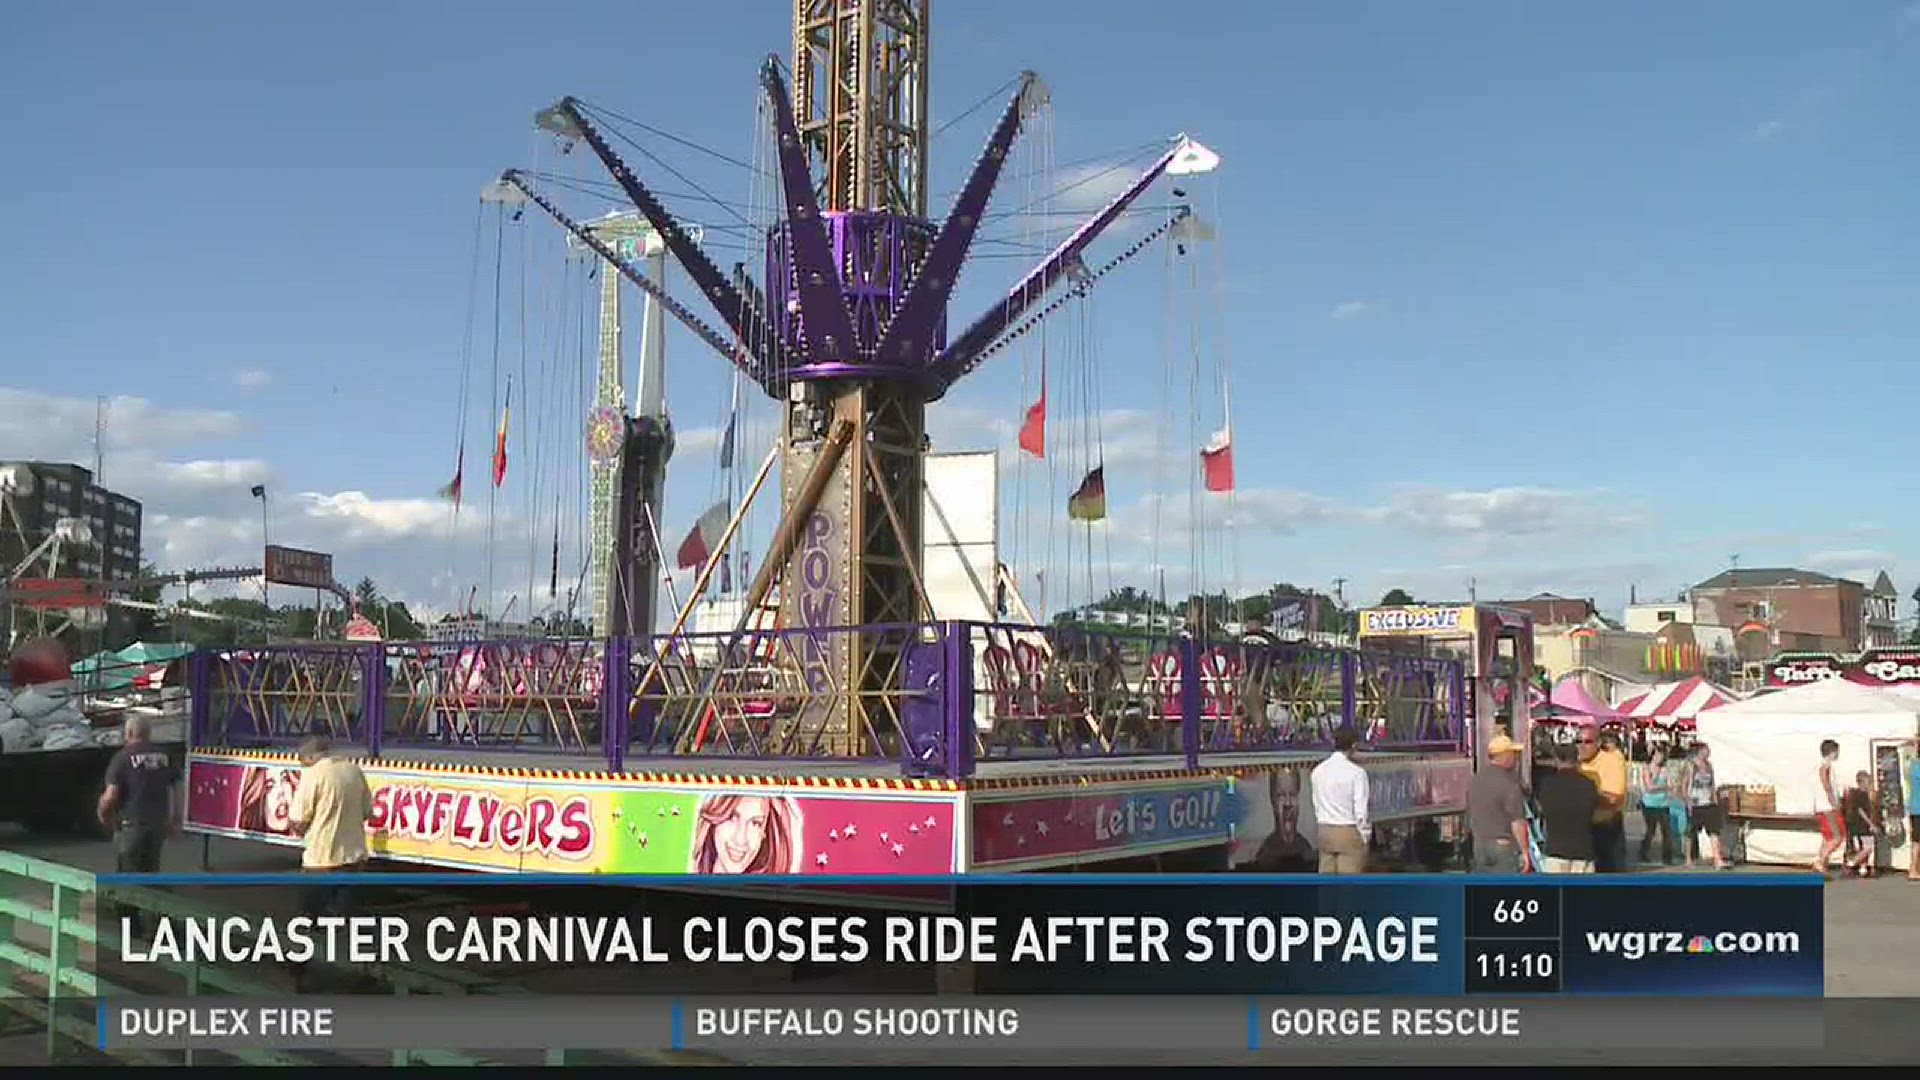 Lancaster carnival closes ride after stoppage